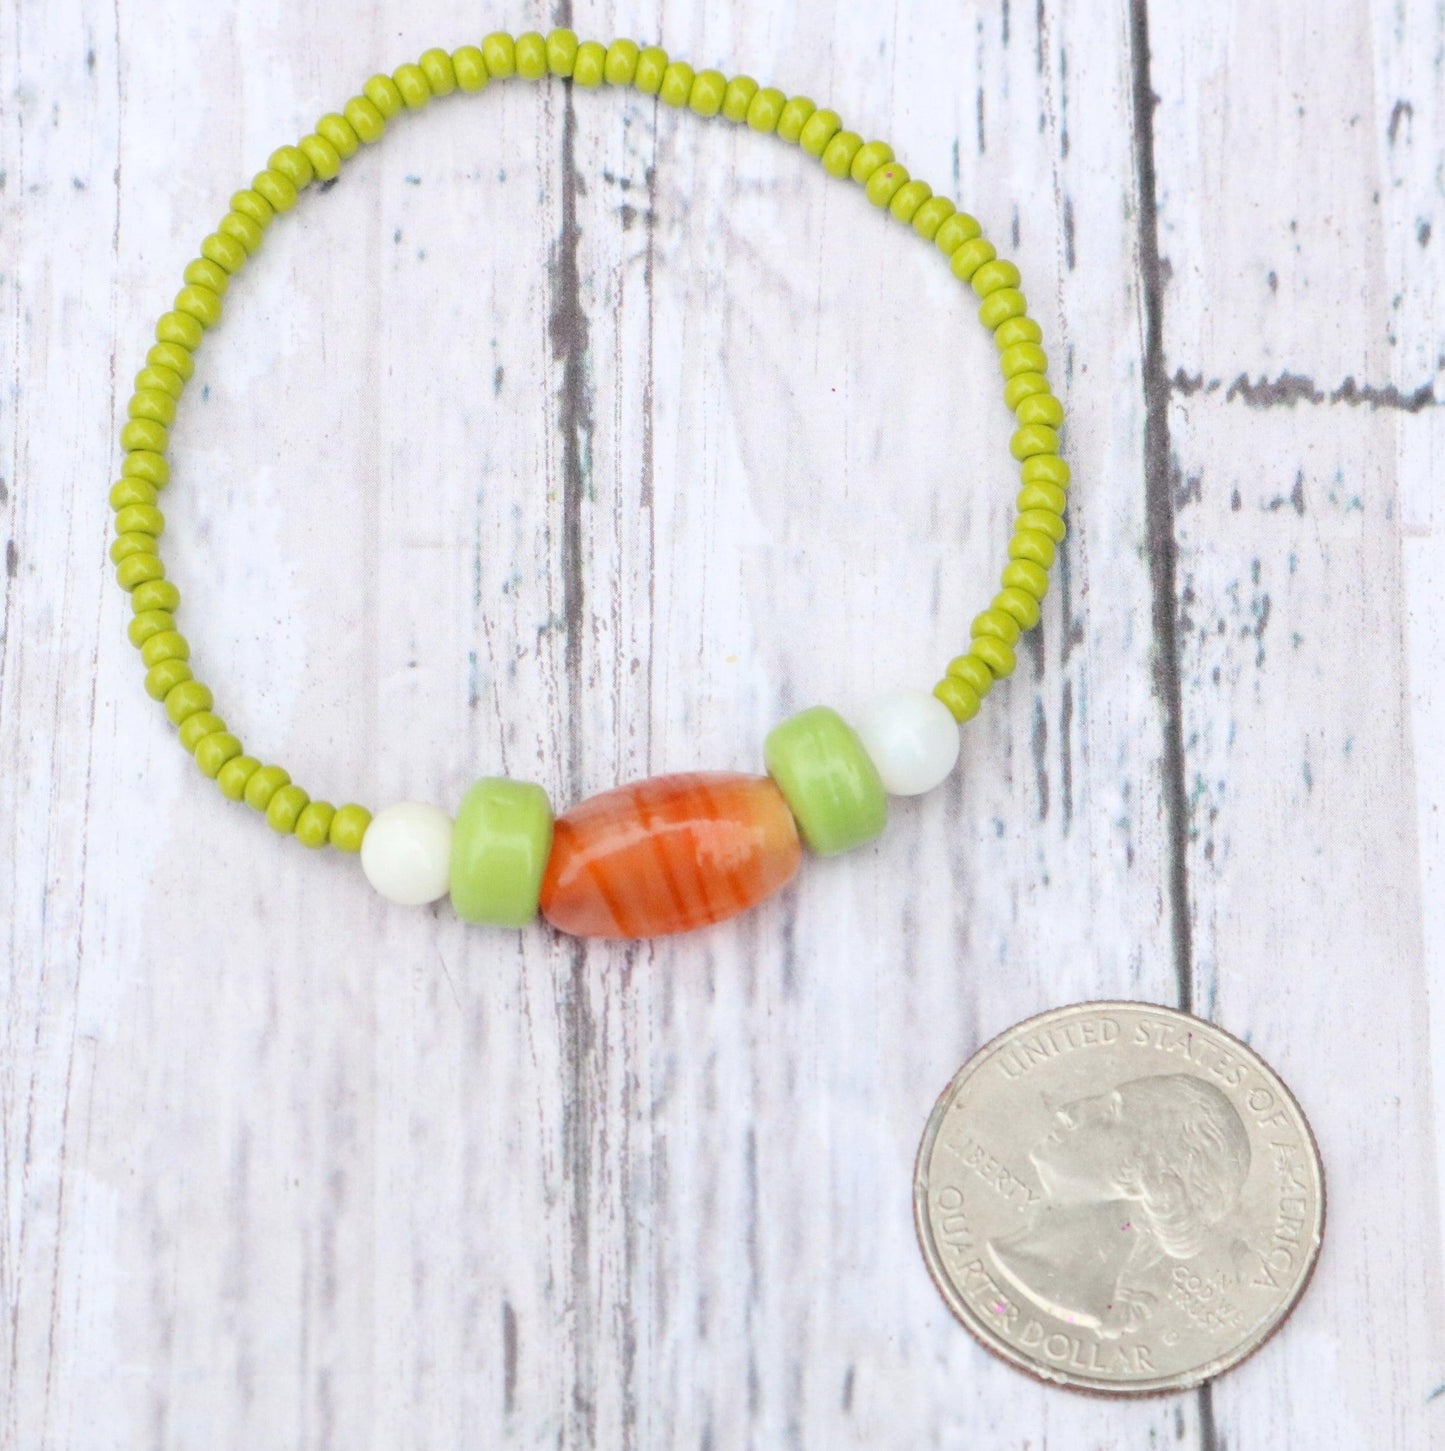 Bunny Hop Carrot Love Easter Treat Orange and Green Glass Bracelet Coin Comparison Size